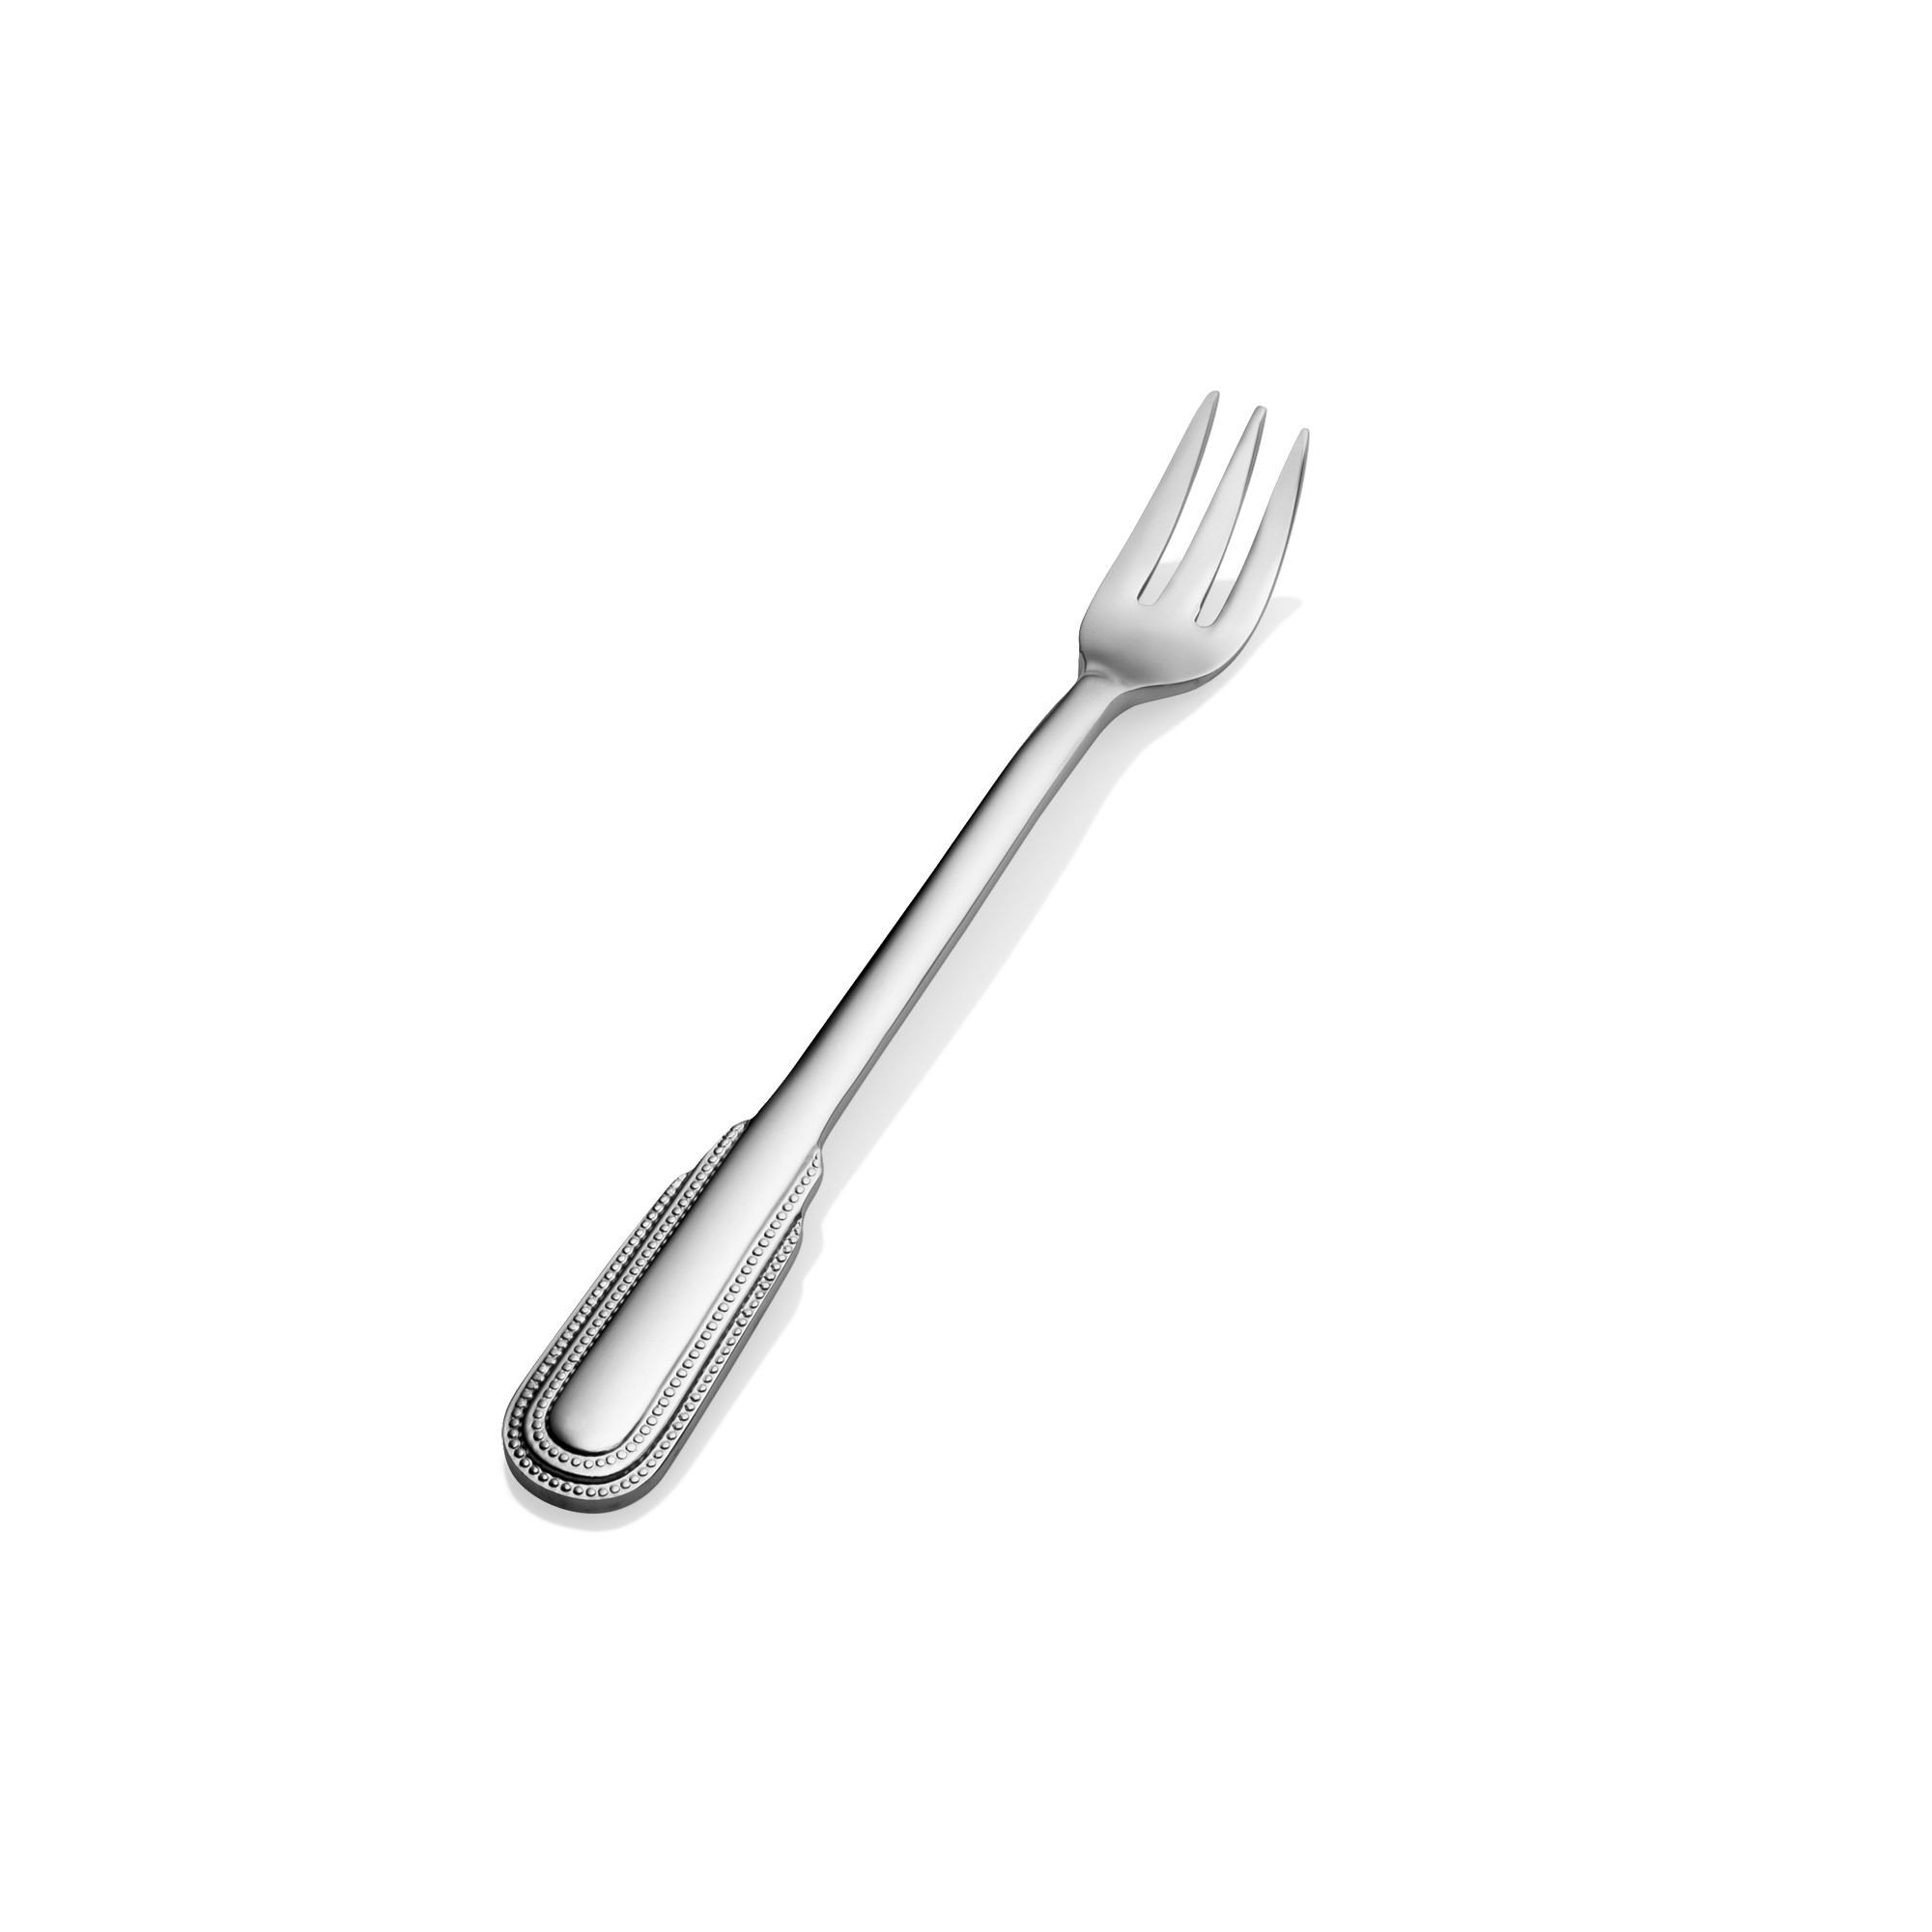 Bon Chef S2408 Empire 18/8 Stainless Steel Oyster Fork